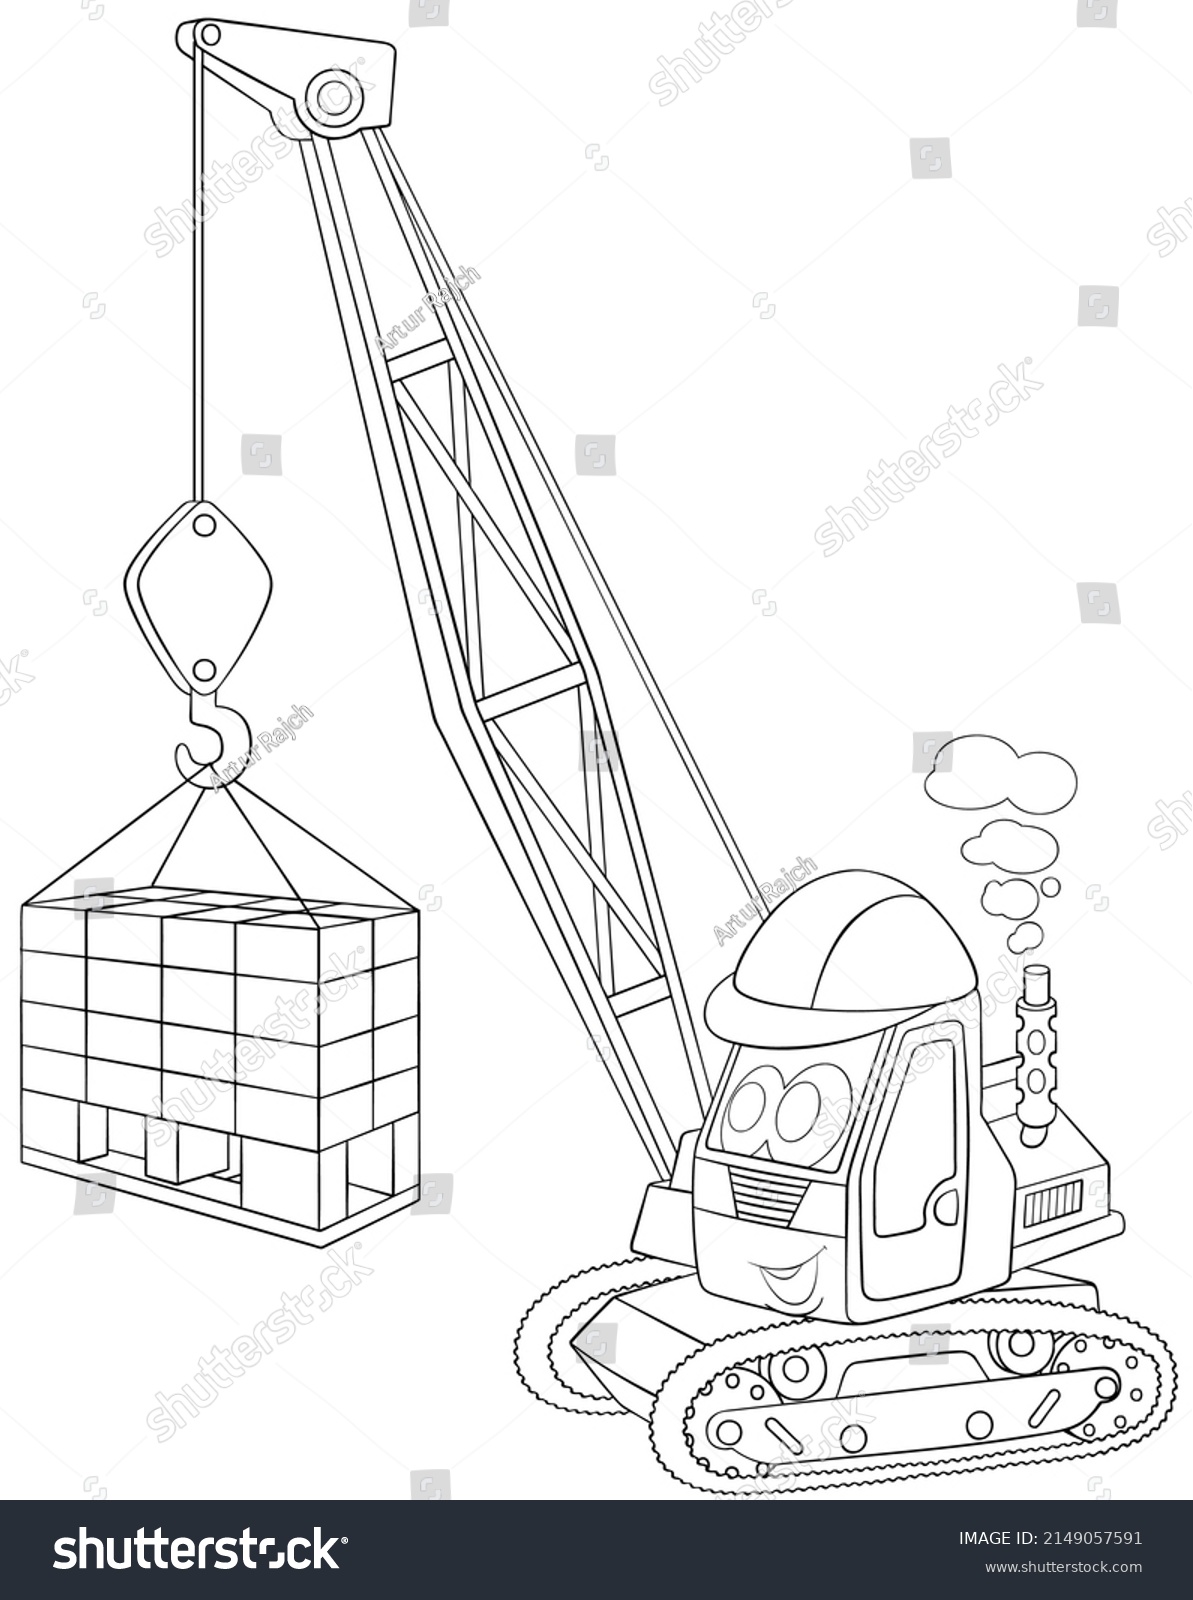 Mobile Crane Element Coloring Page Cartoon Stock Vector (Royalty Free